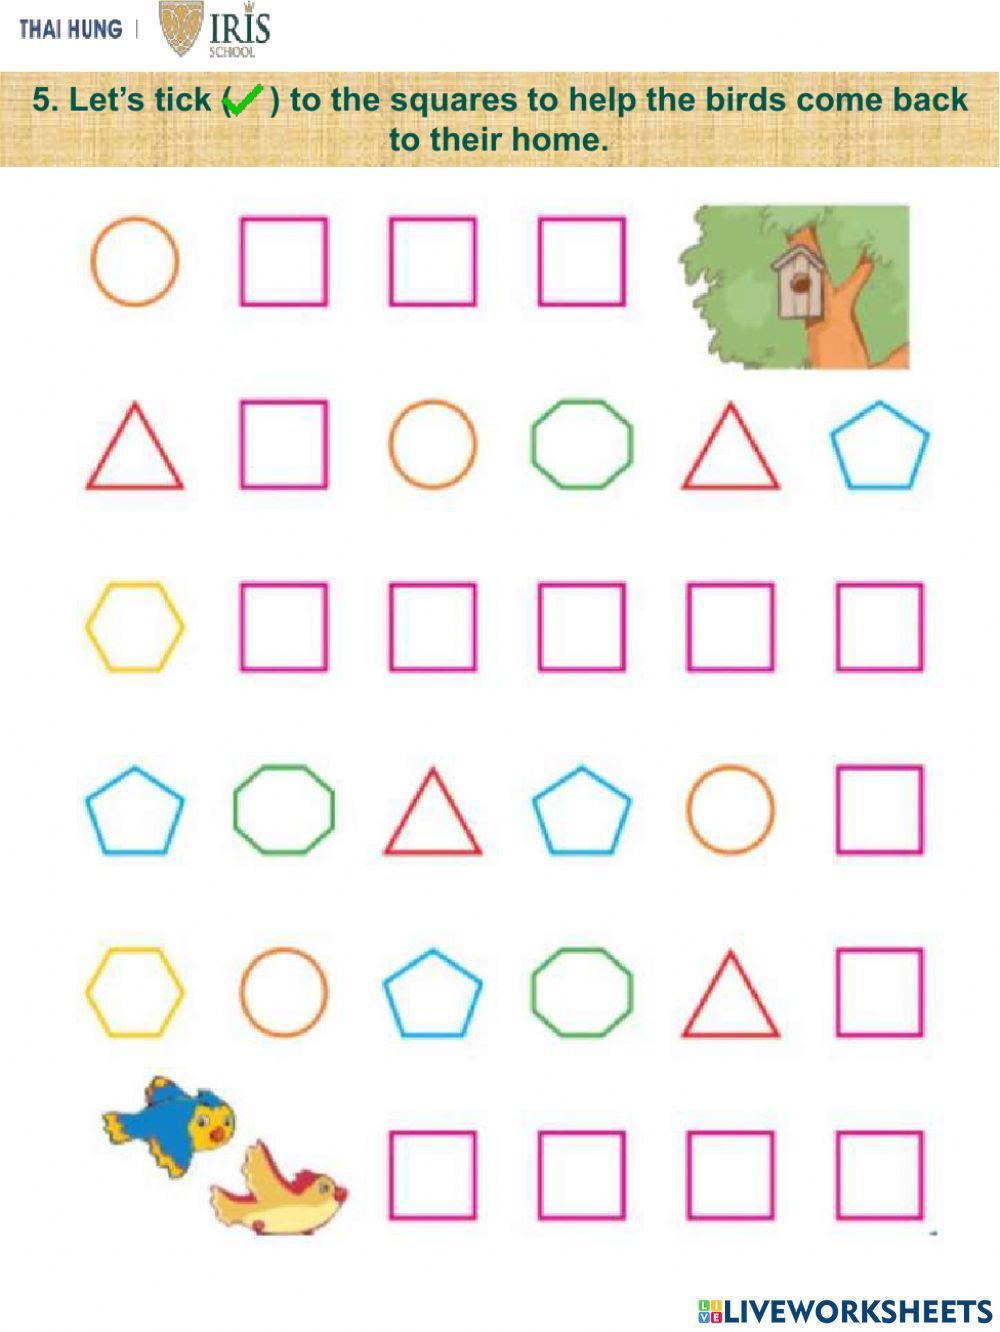 Rainbow-Review Shapes for Kids